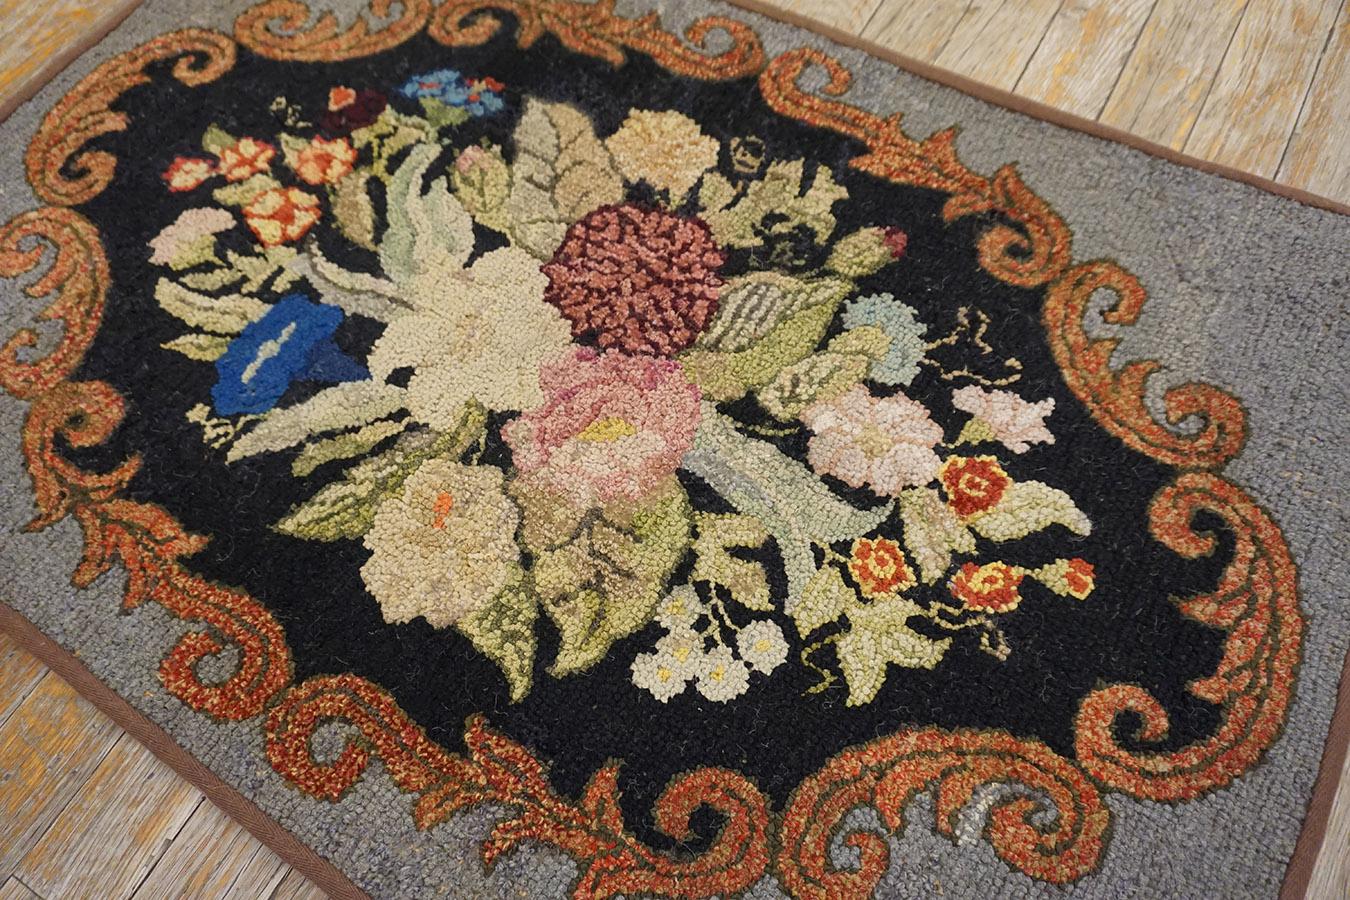 Hand-Woven Early 20th Century American Hooked Rug ( 2' x 3' - 62 x 92 ) For Sale